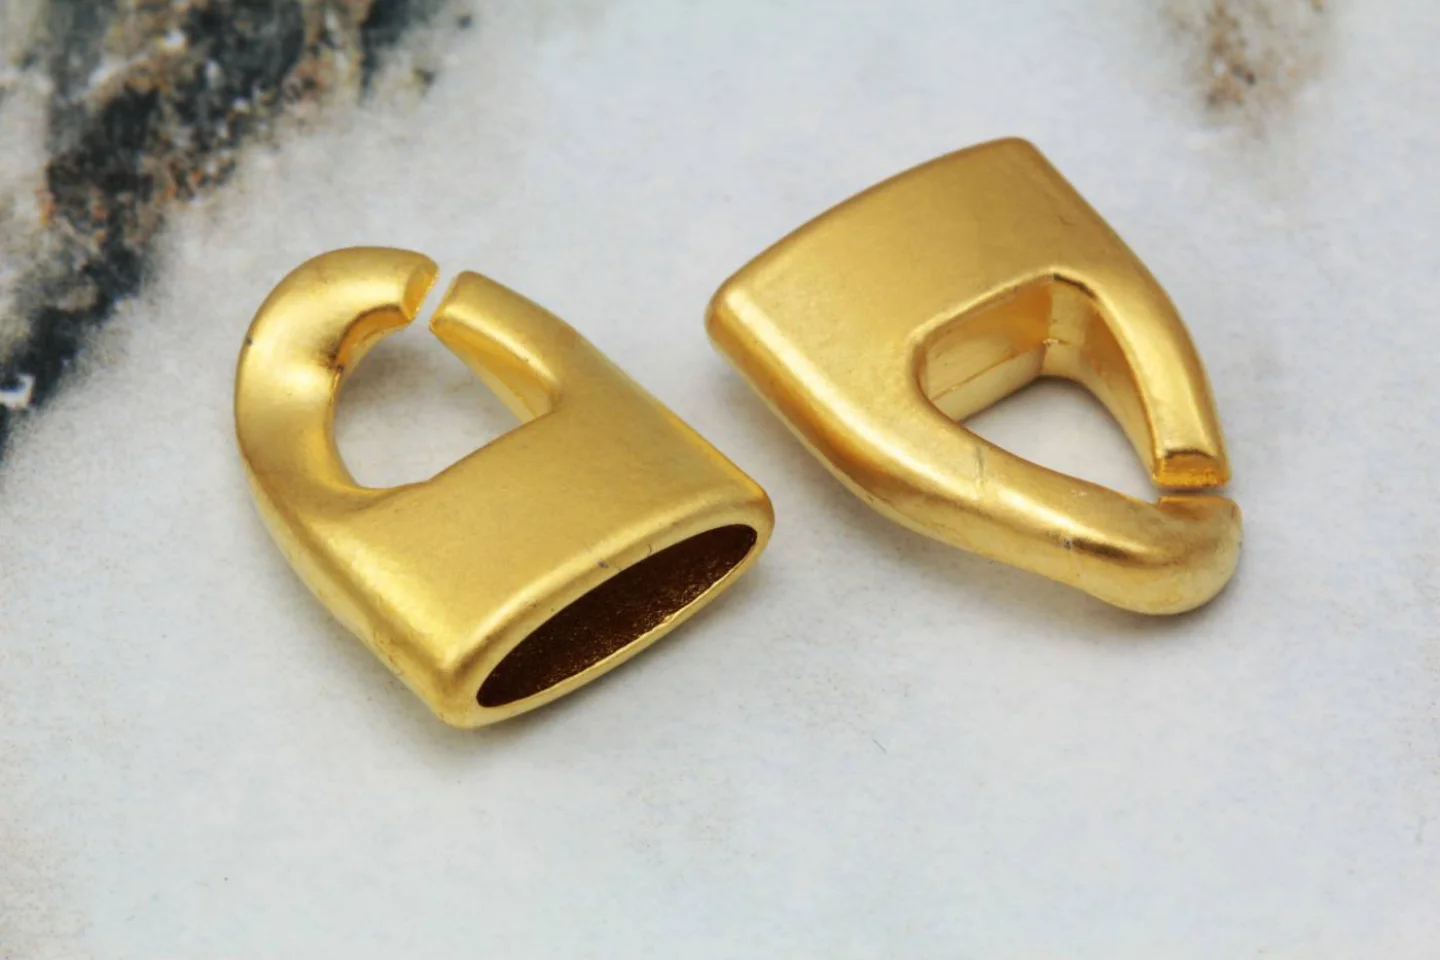 gold-metal-oval-leather-cord-end-clasps.